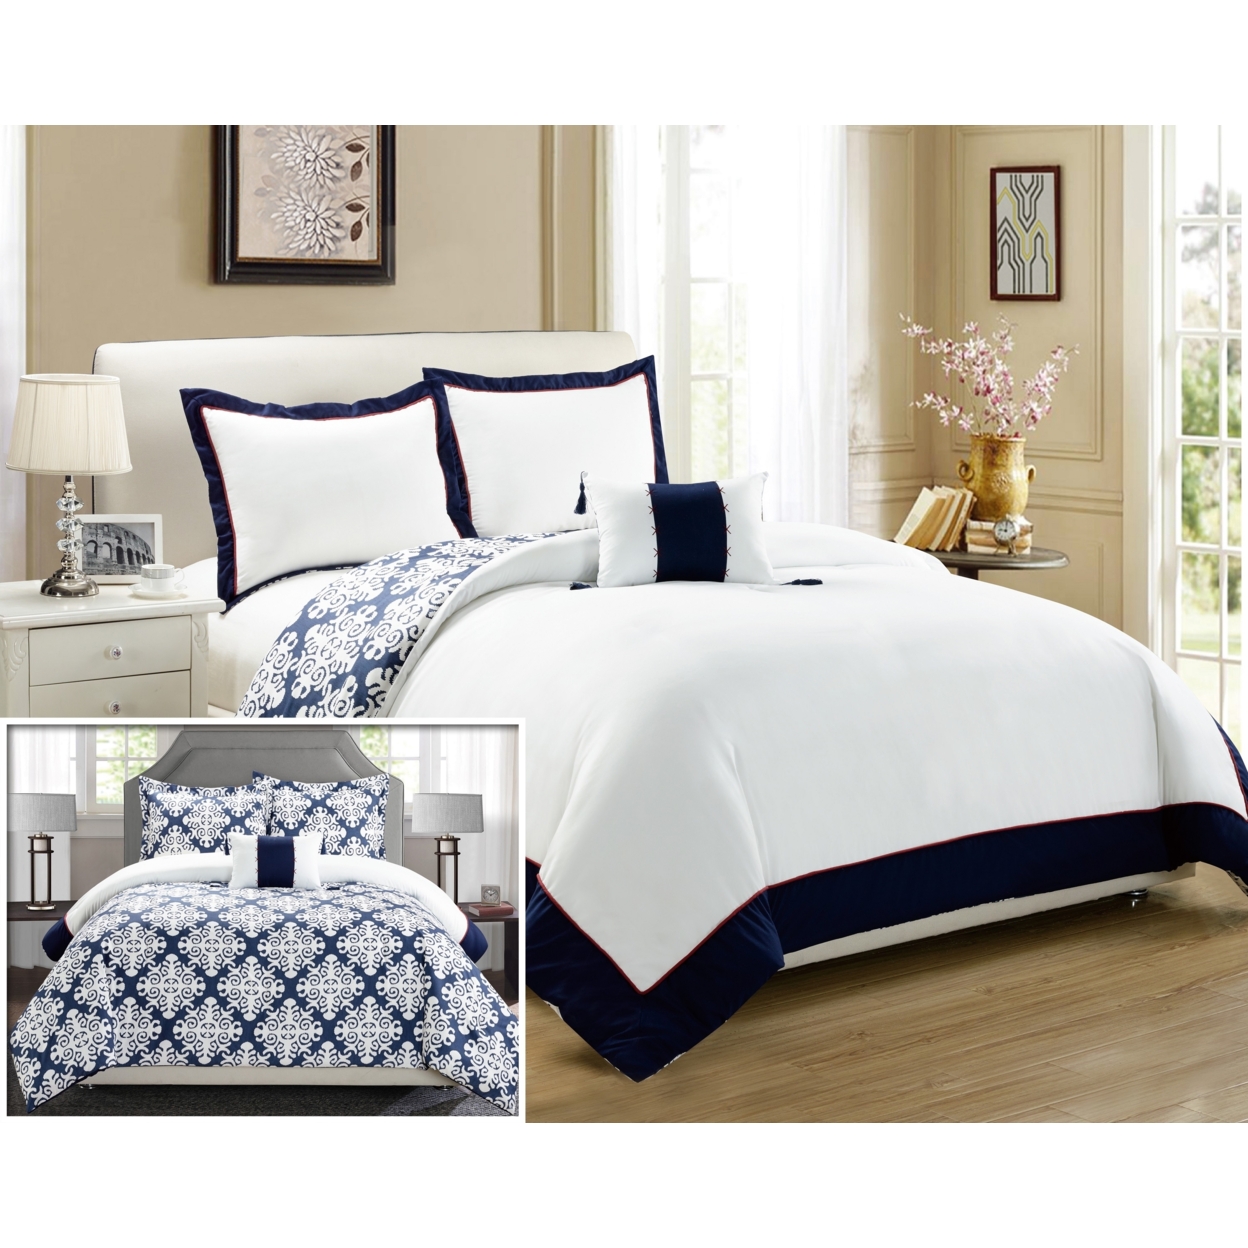 Chic Home 3/4 Piece Mallow Black And White REVERSIBLE Medallion Printed PLUSH Hotel Collection Duvet Cover Set - Navy, King